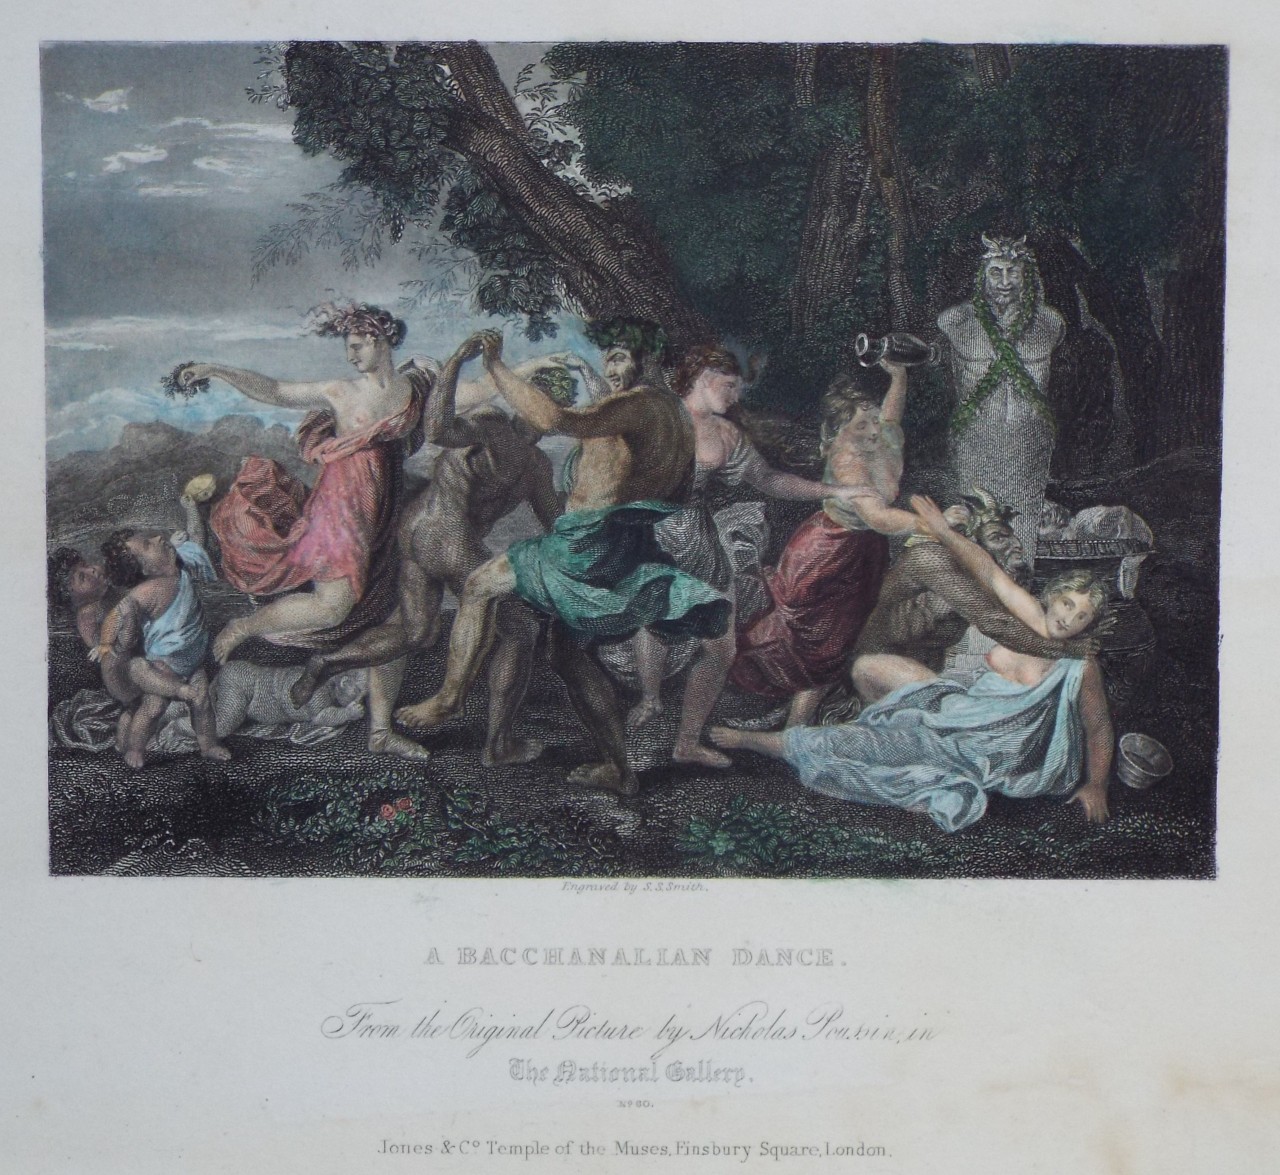 Print - A Bacchanalian Dance. From the Picture by Nicholas Poussin, in the National Gallery. - Smith